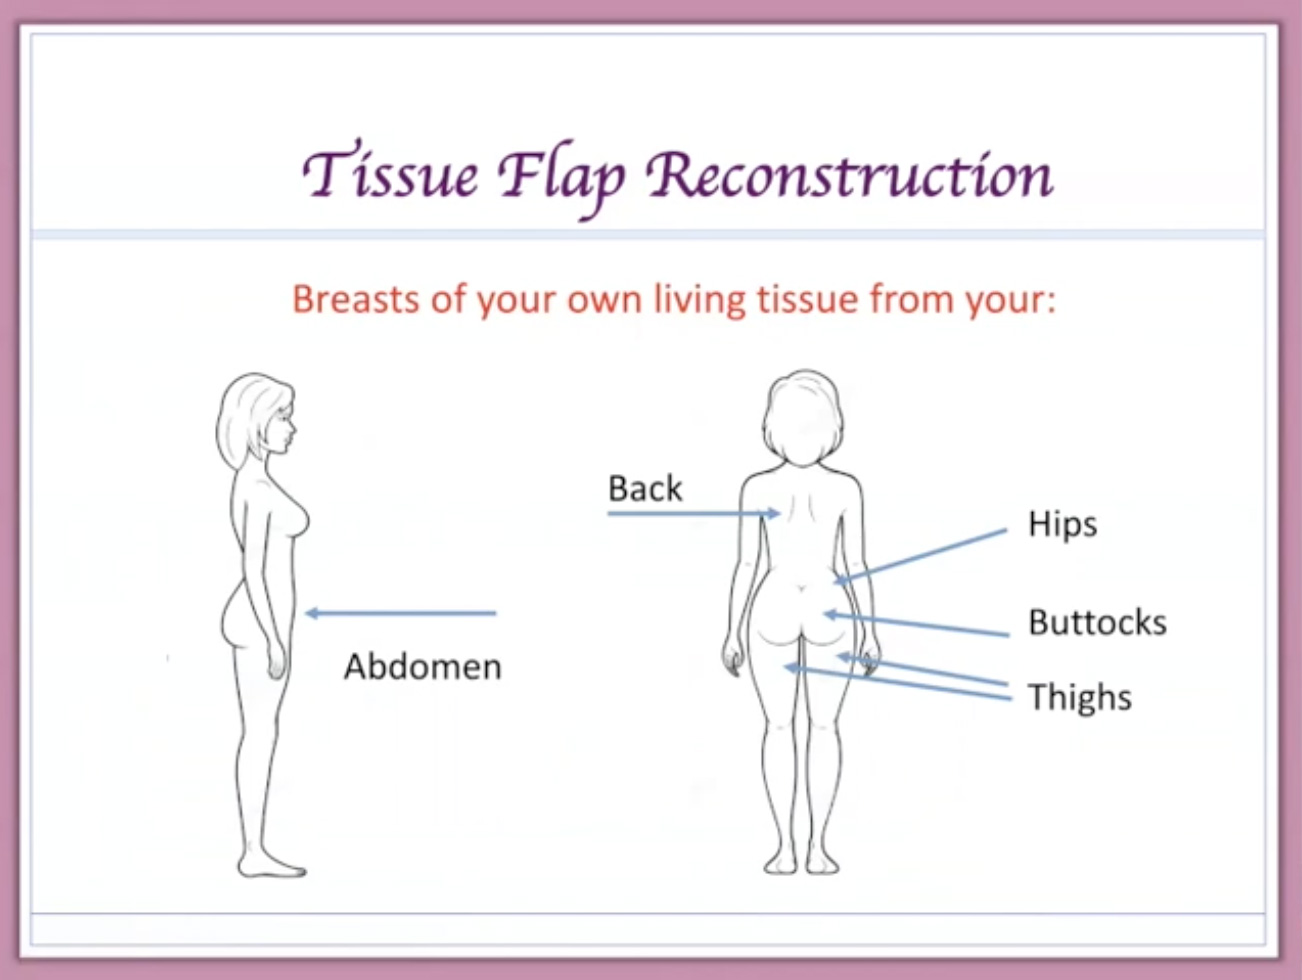 Choosing To Go Flat Instead of Breast Reconstruction - OWise UK